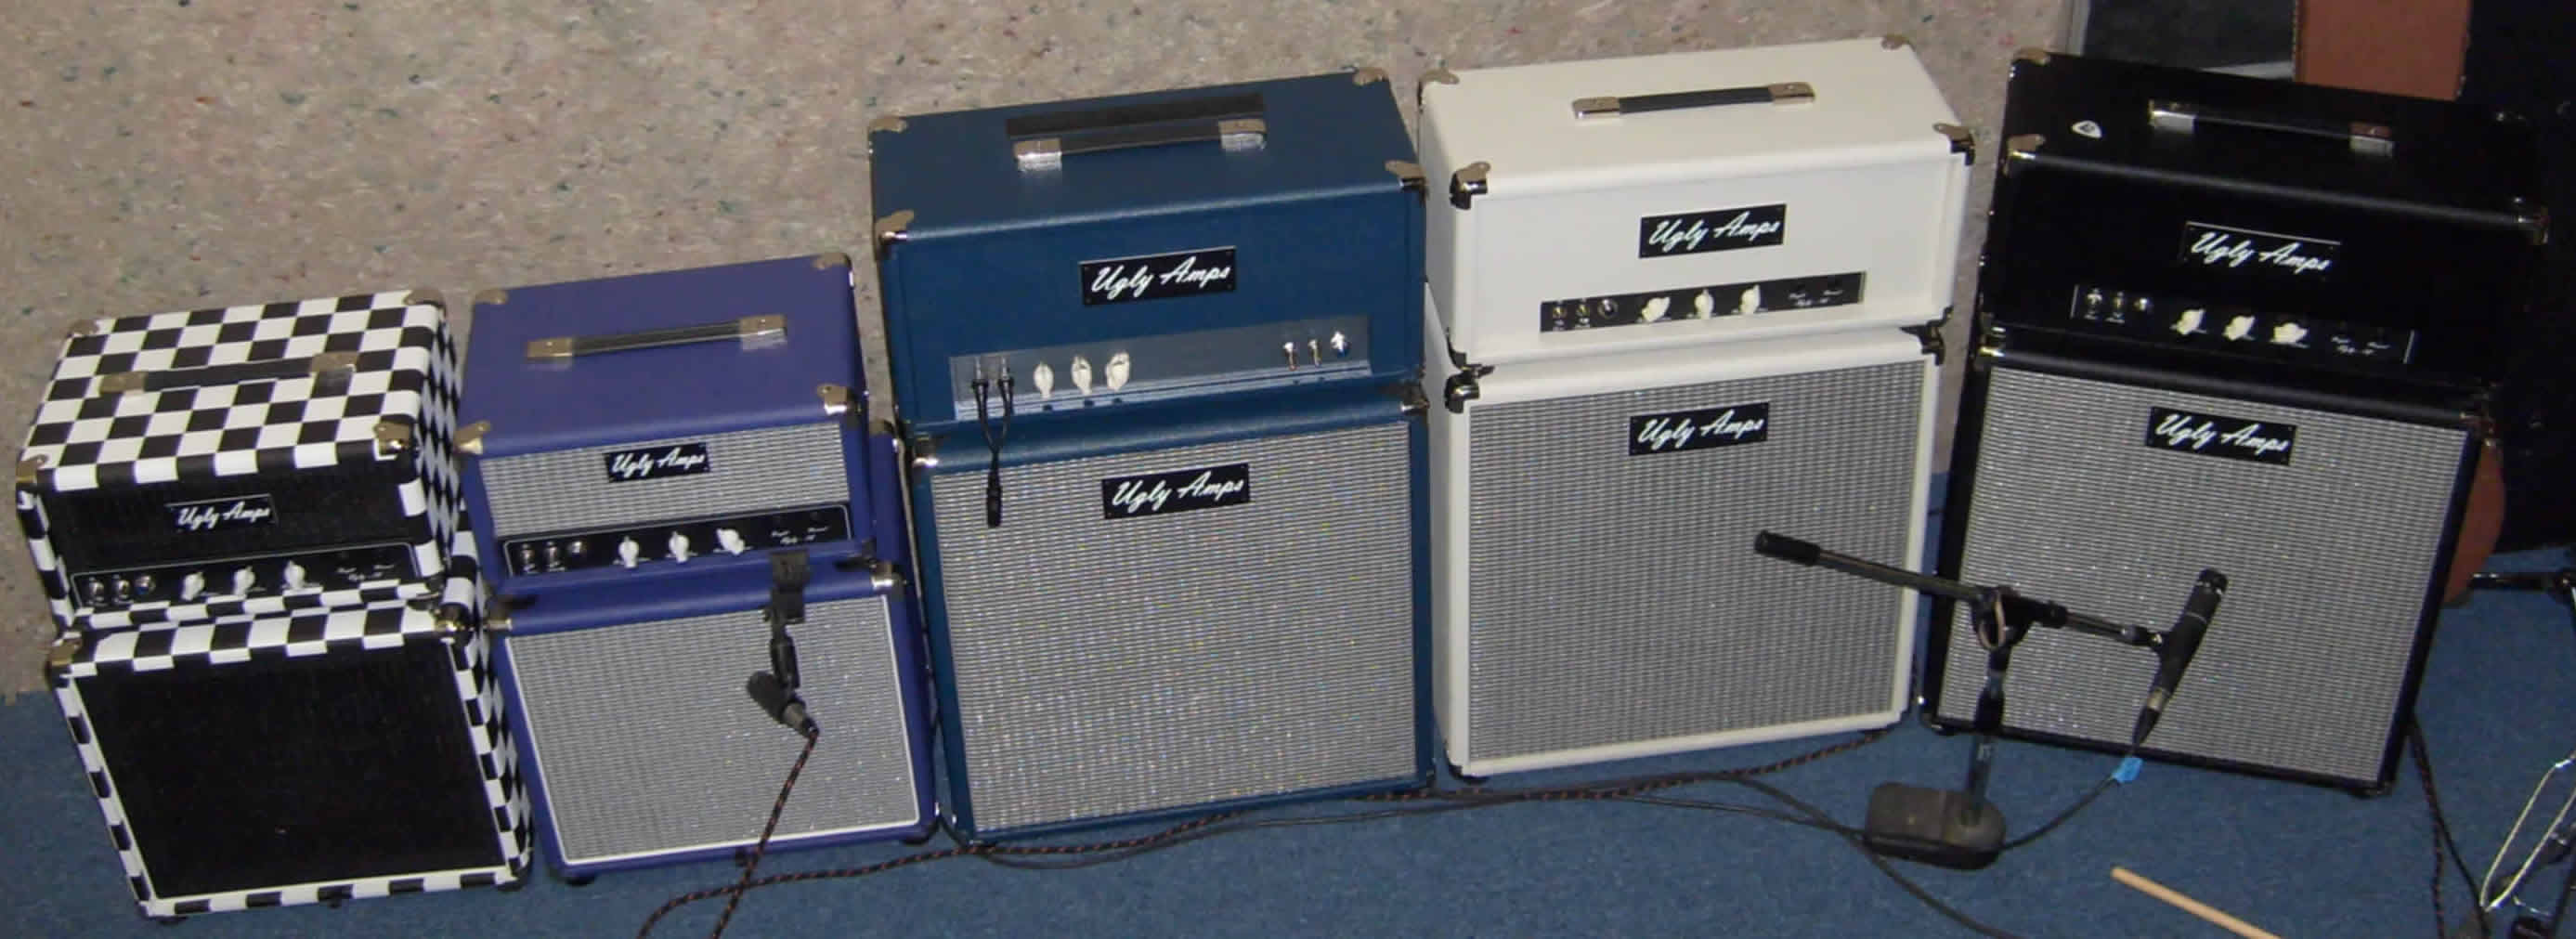 Why Would You Name Your Brand, Ugly Amps? Why?